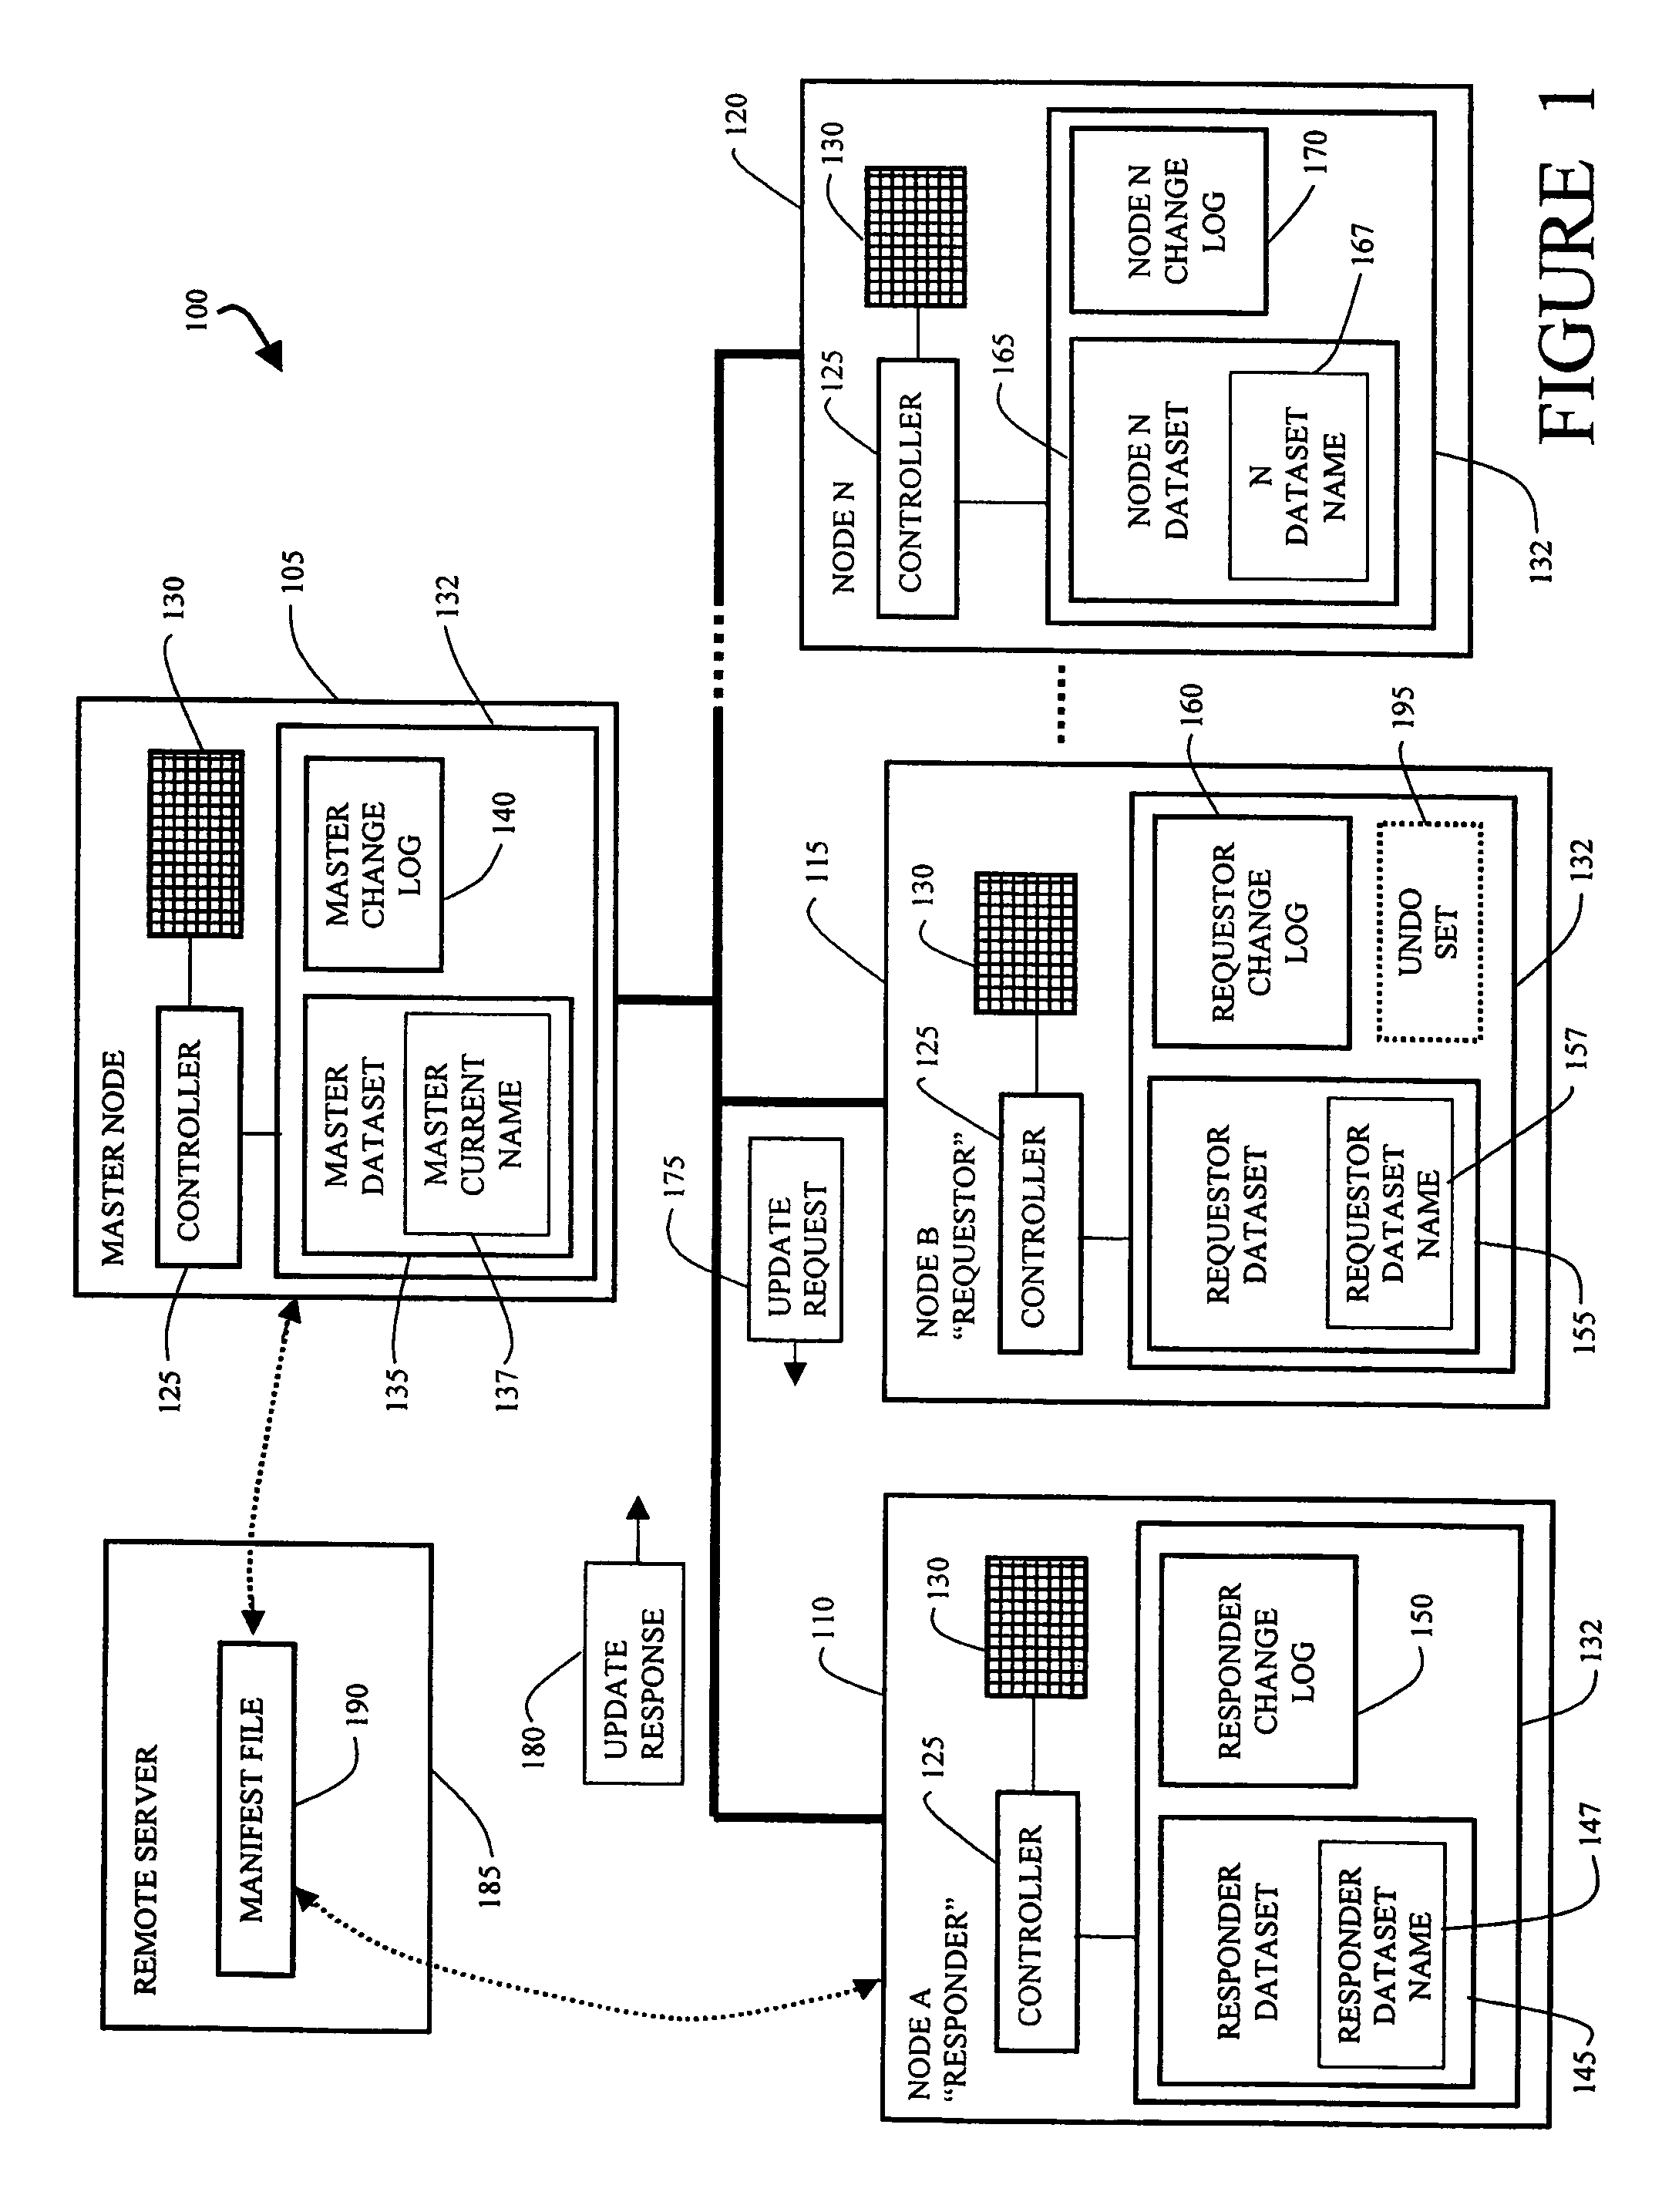 Method and apparatus for efficient propagation of large datasets under failure conditions